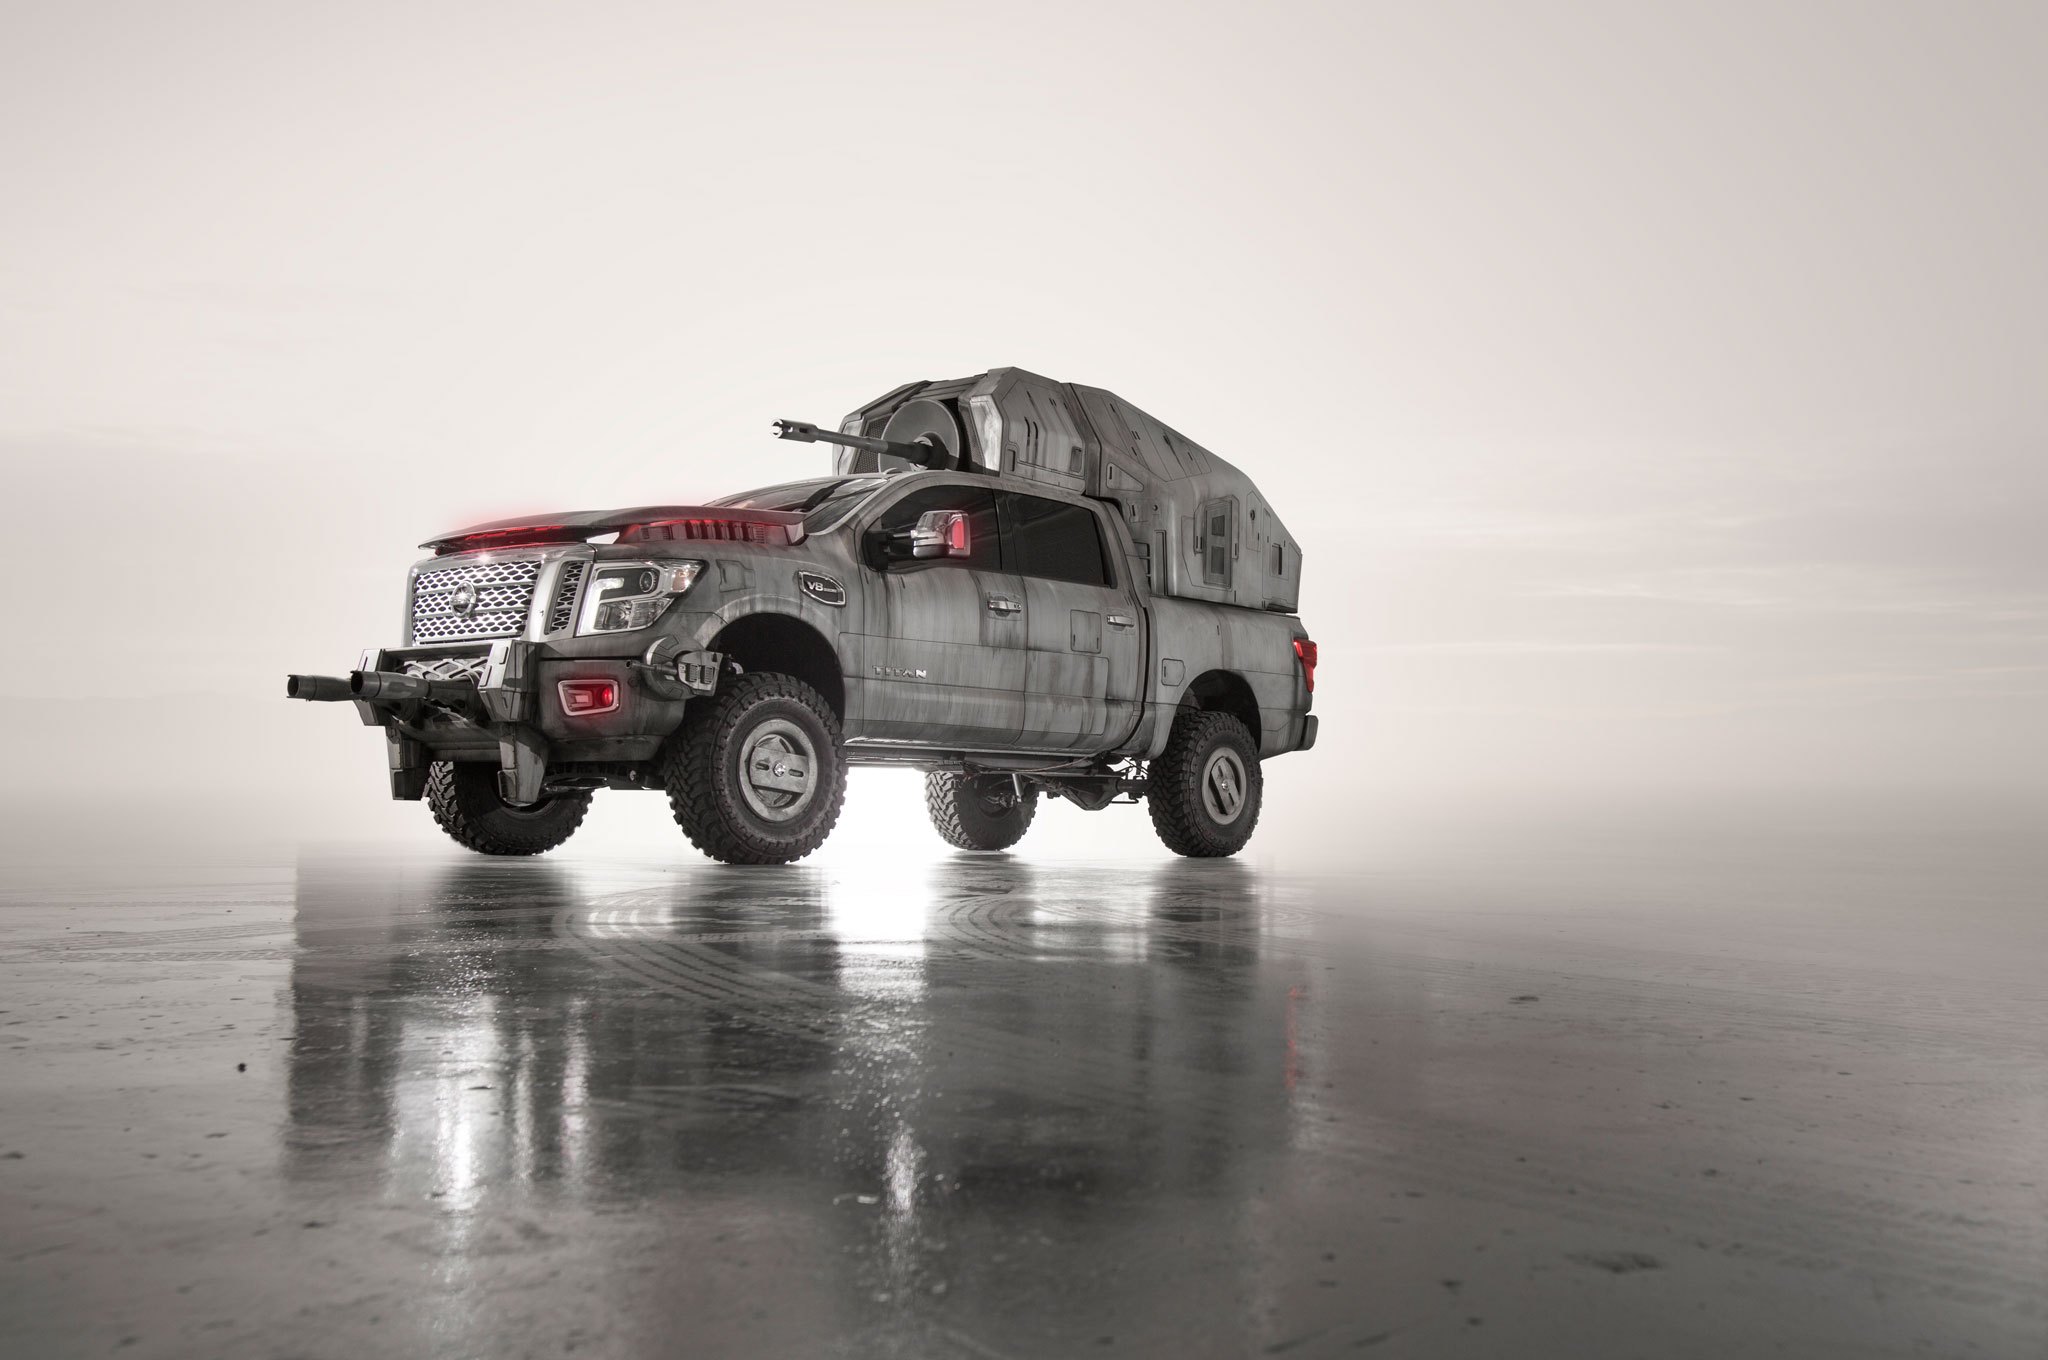 Star Wars Nissan Titan with MegaCaliber Cannon - Photo by Vehicle Effects Inc